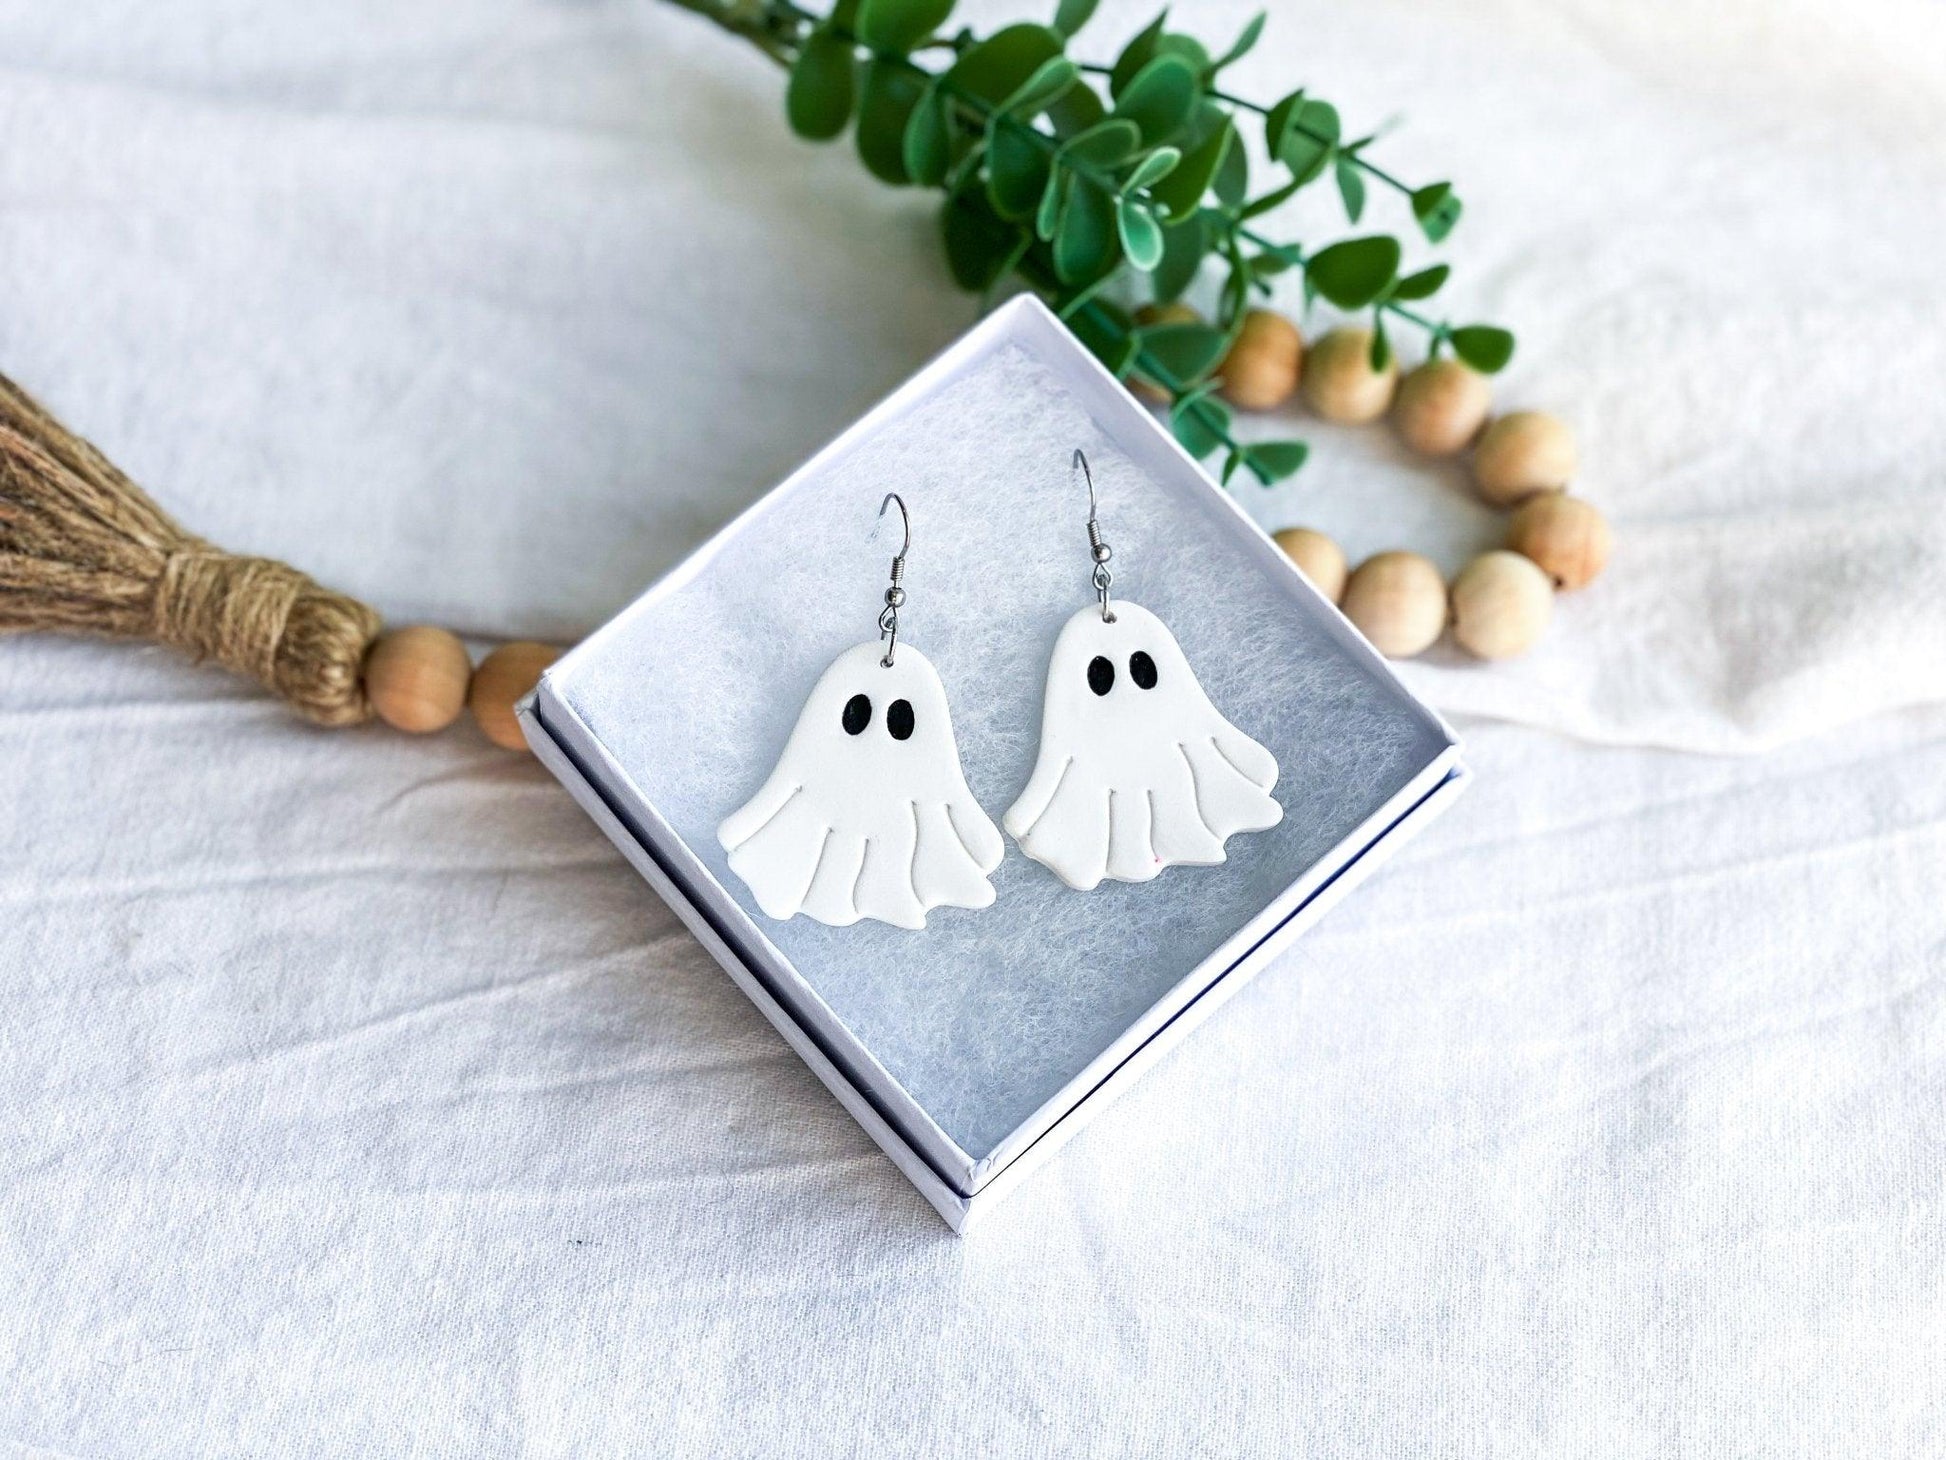 Ghost Dangle Earrings - Halloween Jewelry - Sparkly Earrings - Fun Gift for Teacher - Birthday Gift for Friend - Glow in the Dark - Harbor to Gulf Co.